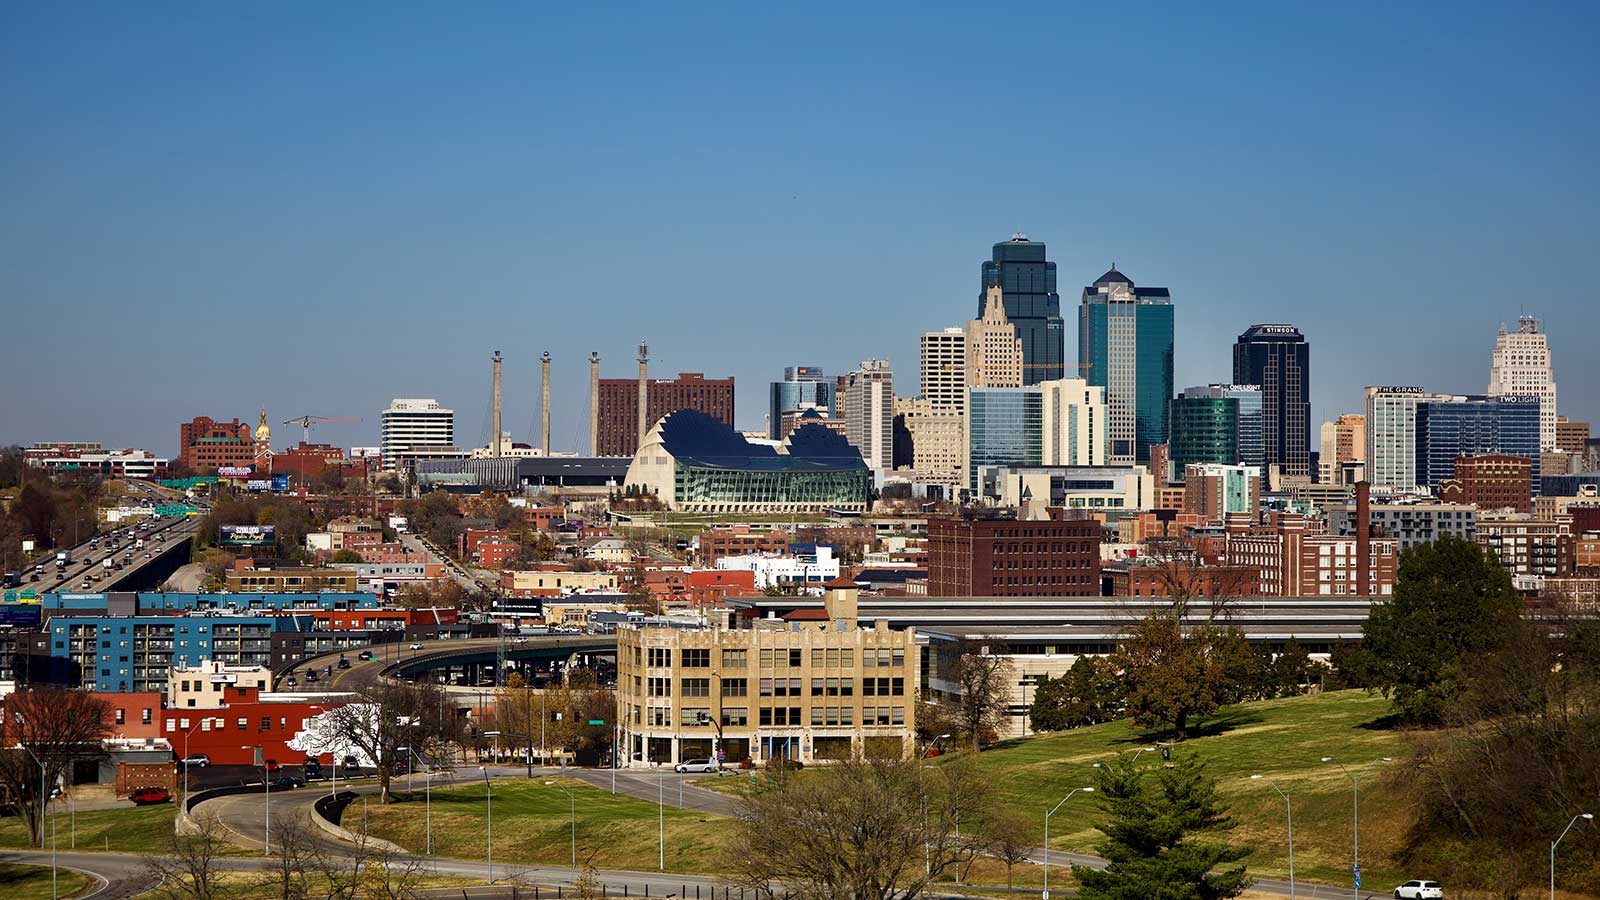 Communities across the country are talking about reparations. What about Kansas City?